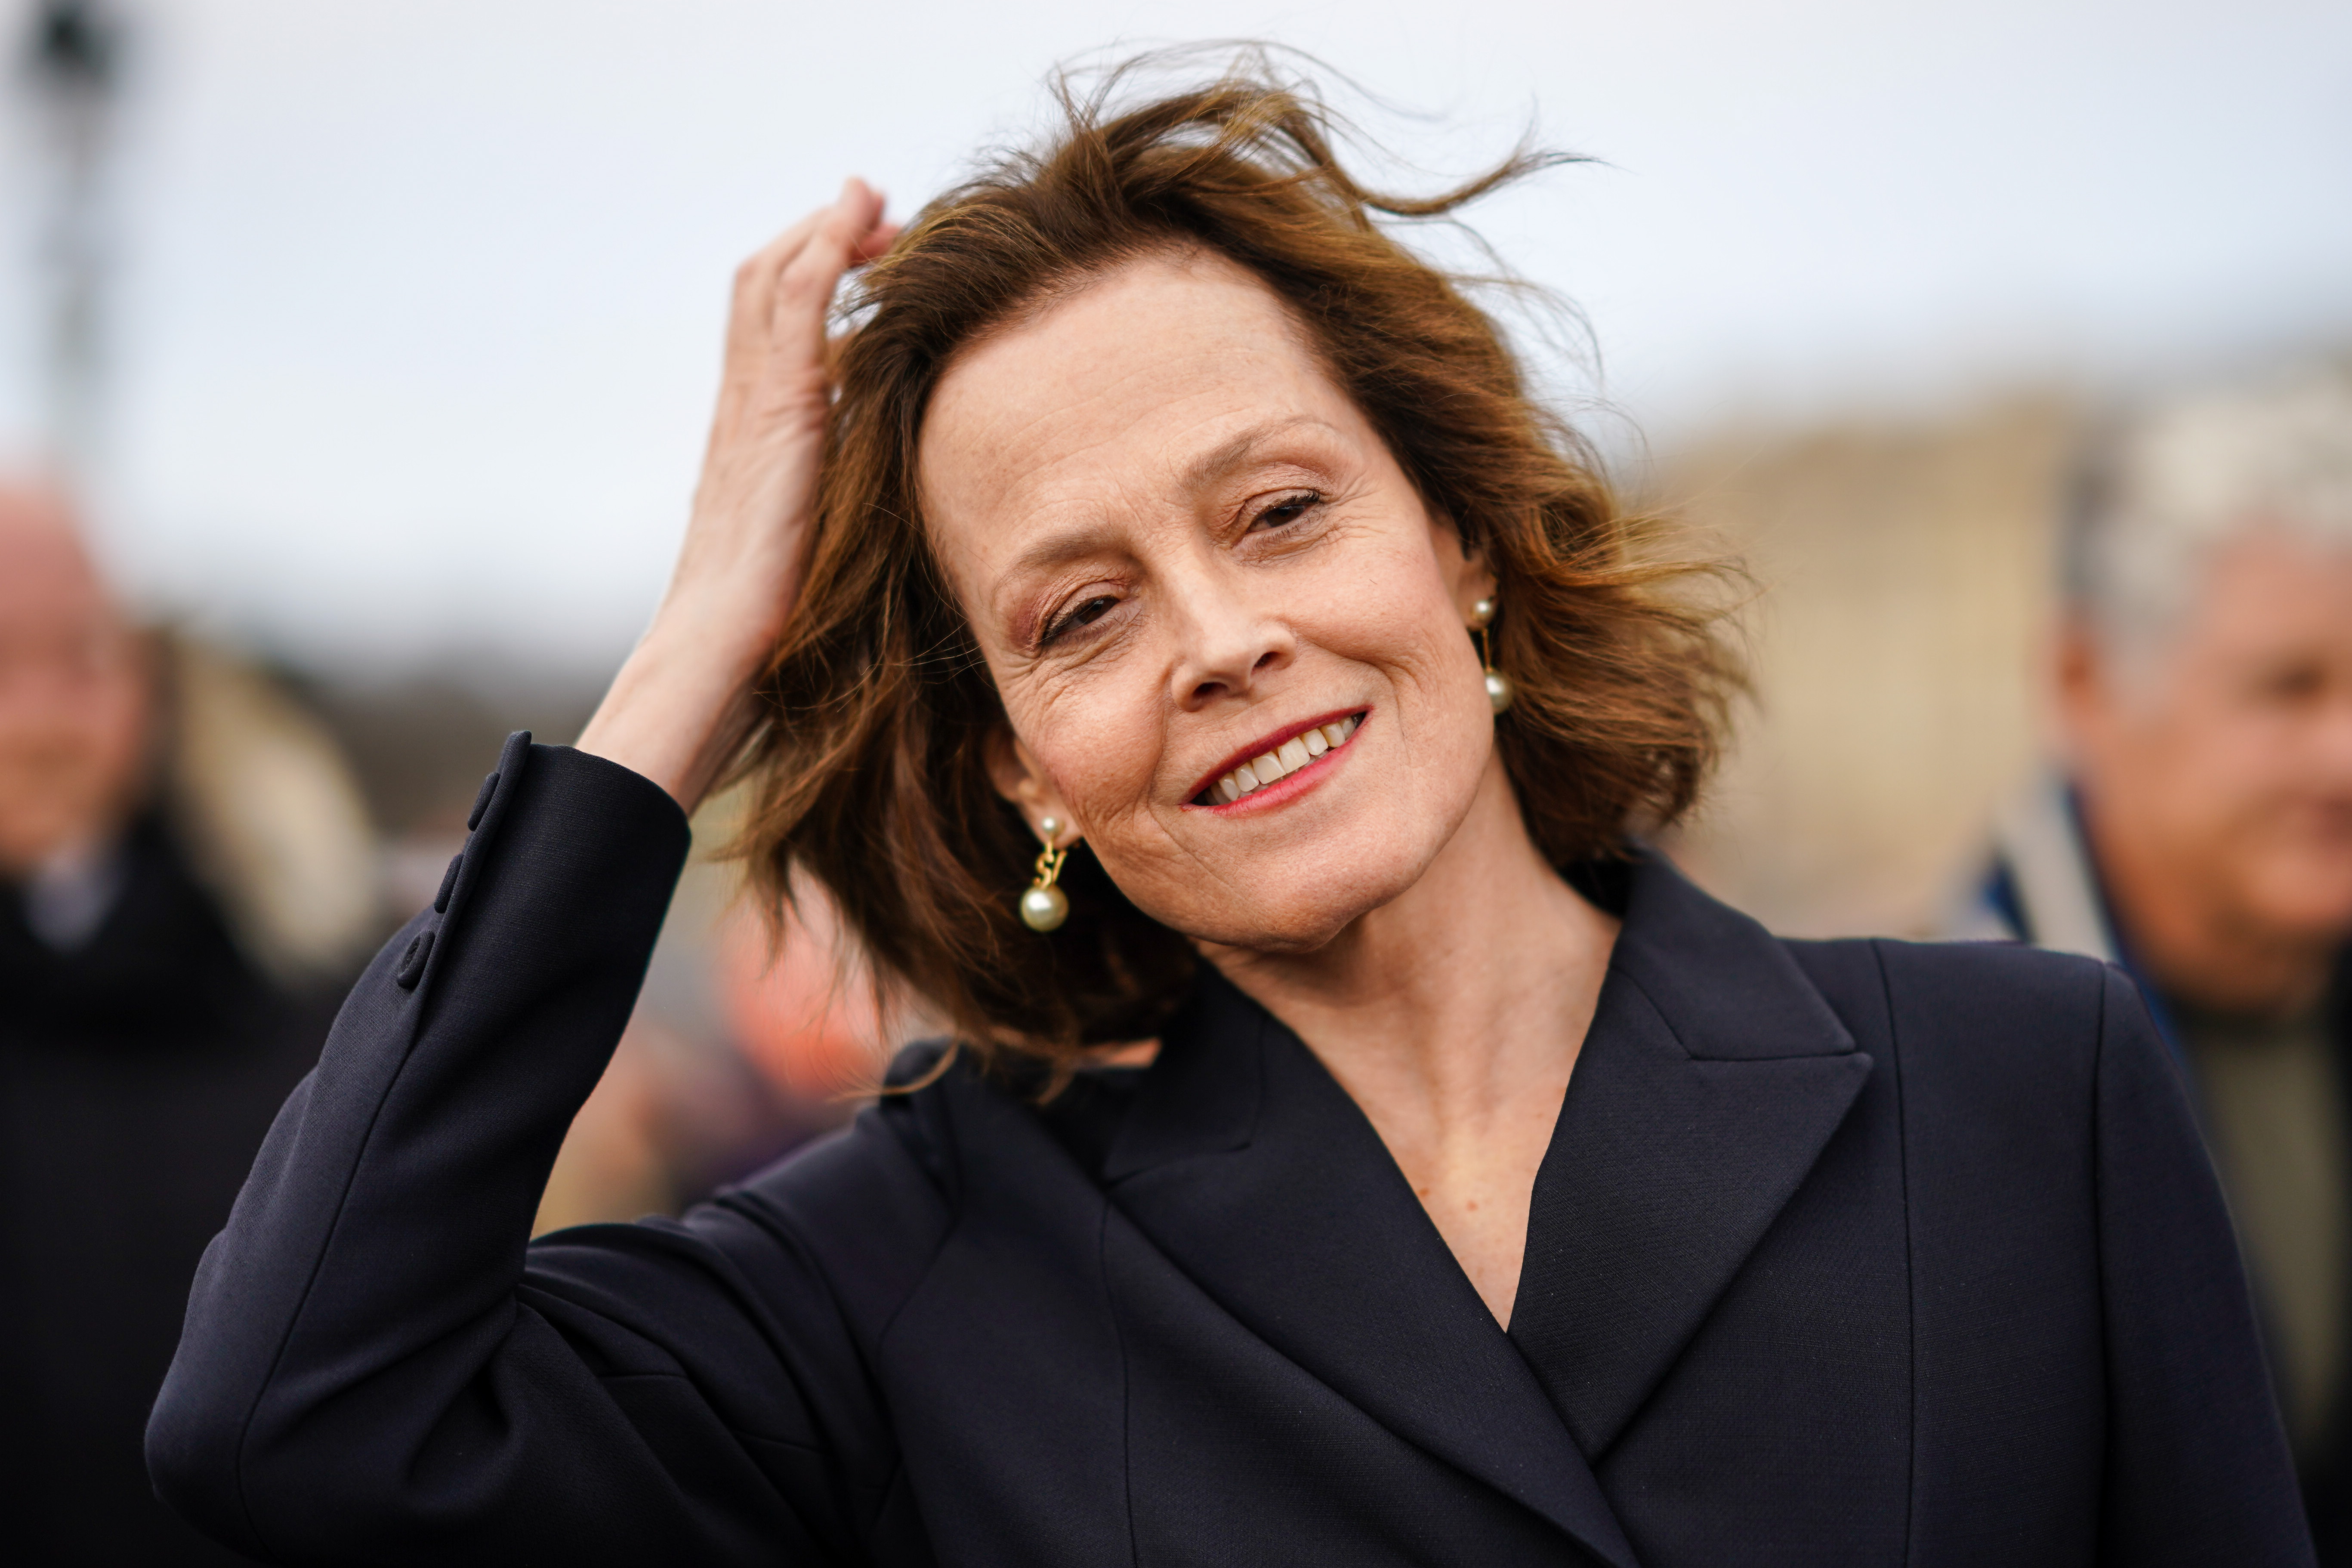 Sigourney Weaver during Paris Fashion Week - Womenswear Fall/Winter 2020/2021, on February 25, 2020, in Paris, France | Source: Getty Images